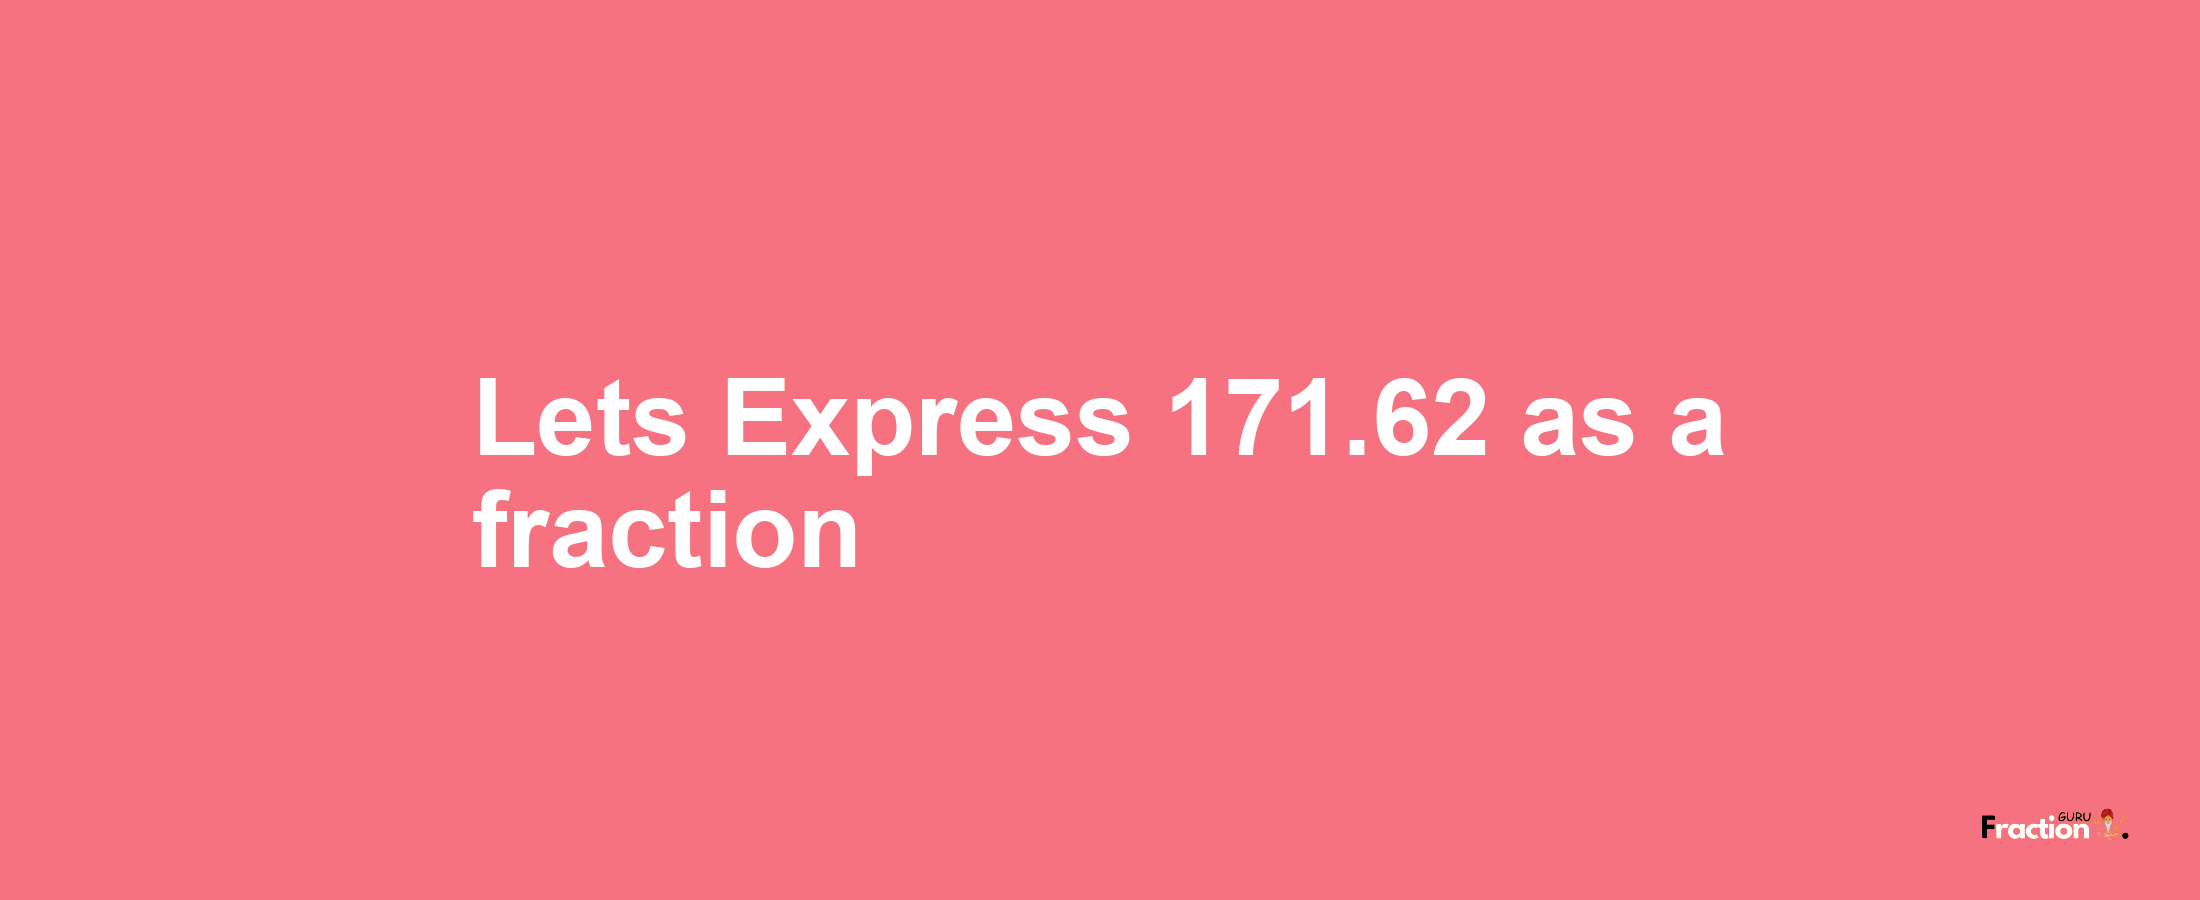 Lets Express 171.62 as afraction